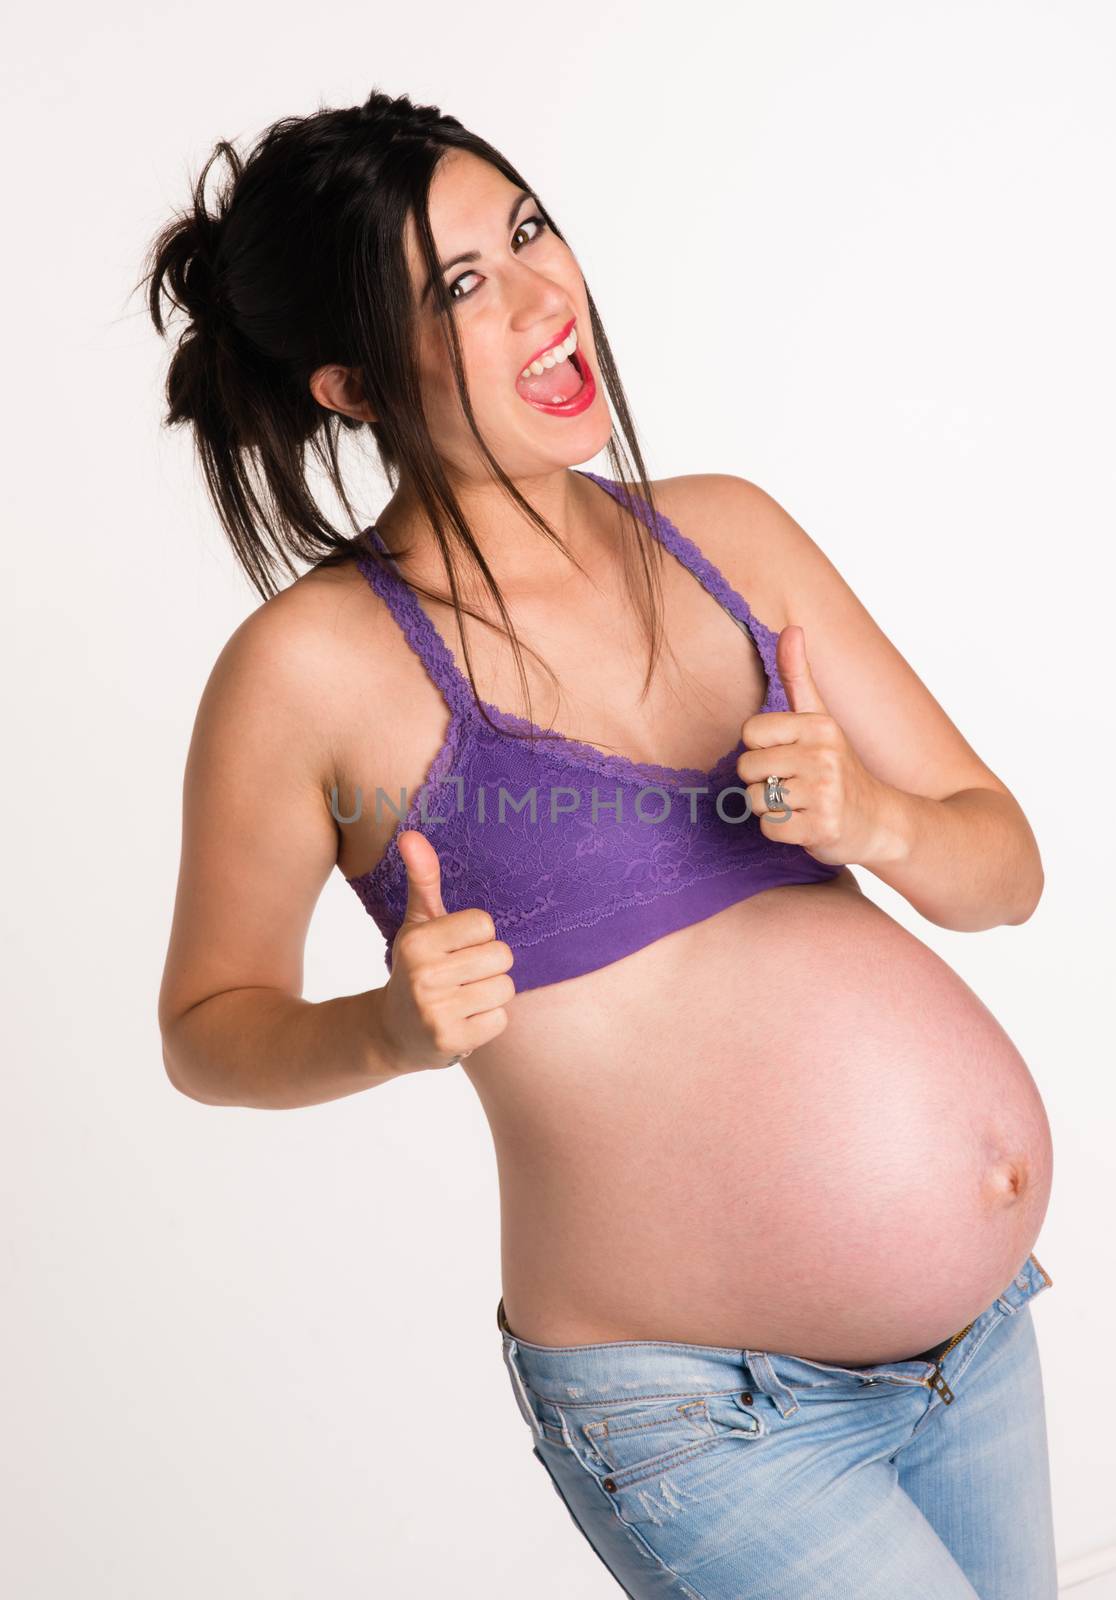 Attractive Pregnant Woman Gives A-OK Hand Signal Thumbs Up by ChrisBoswell